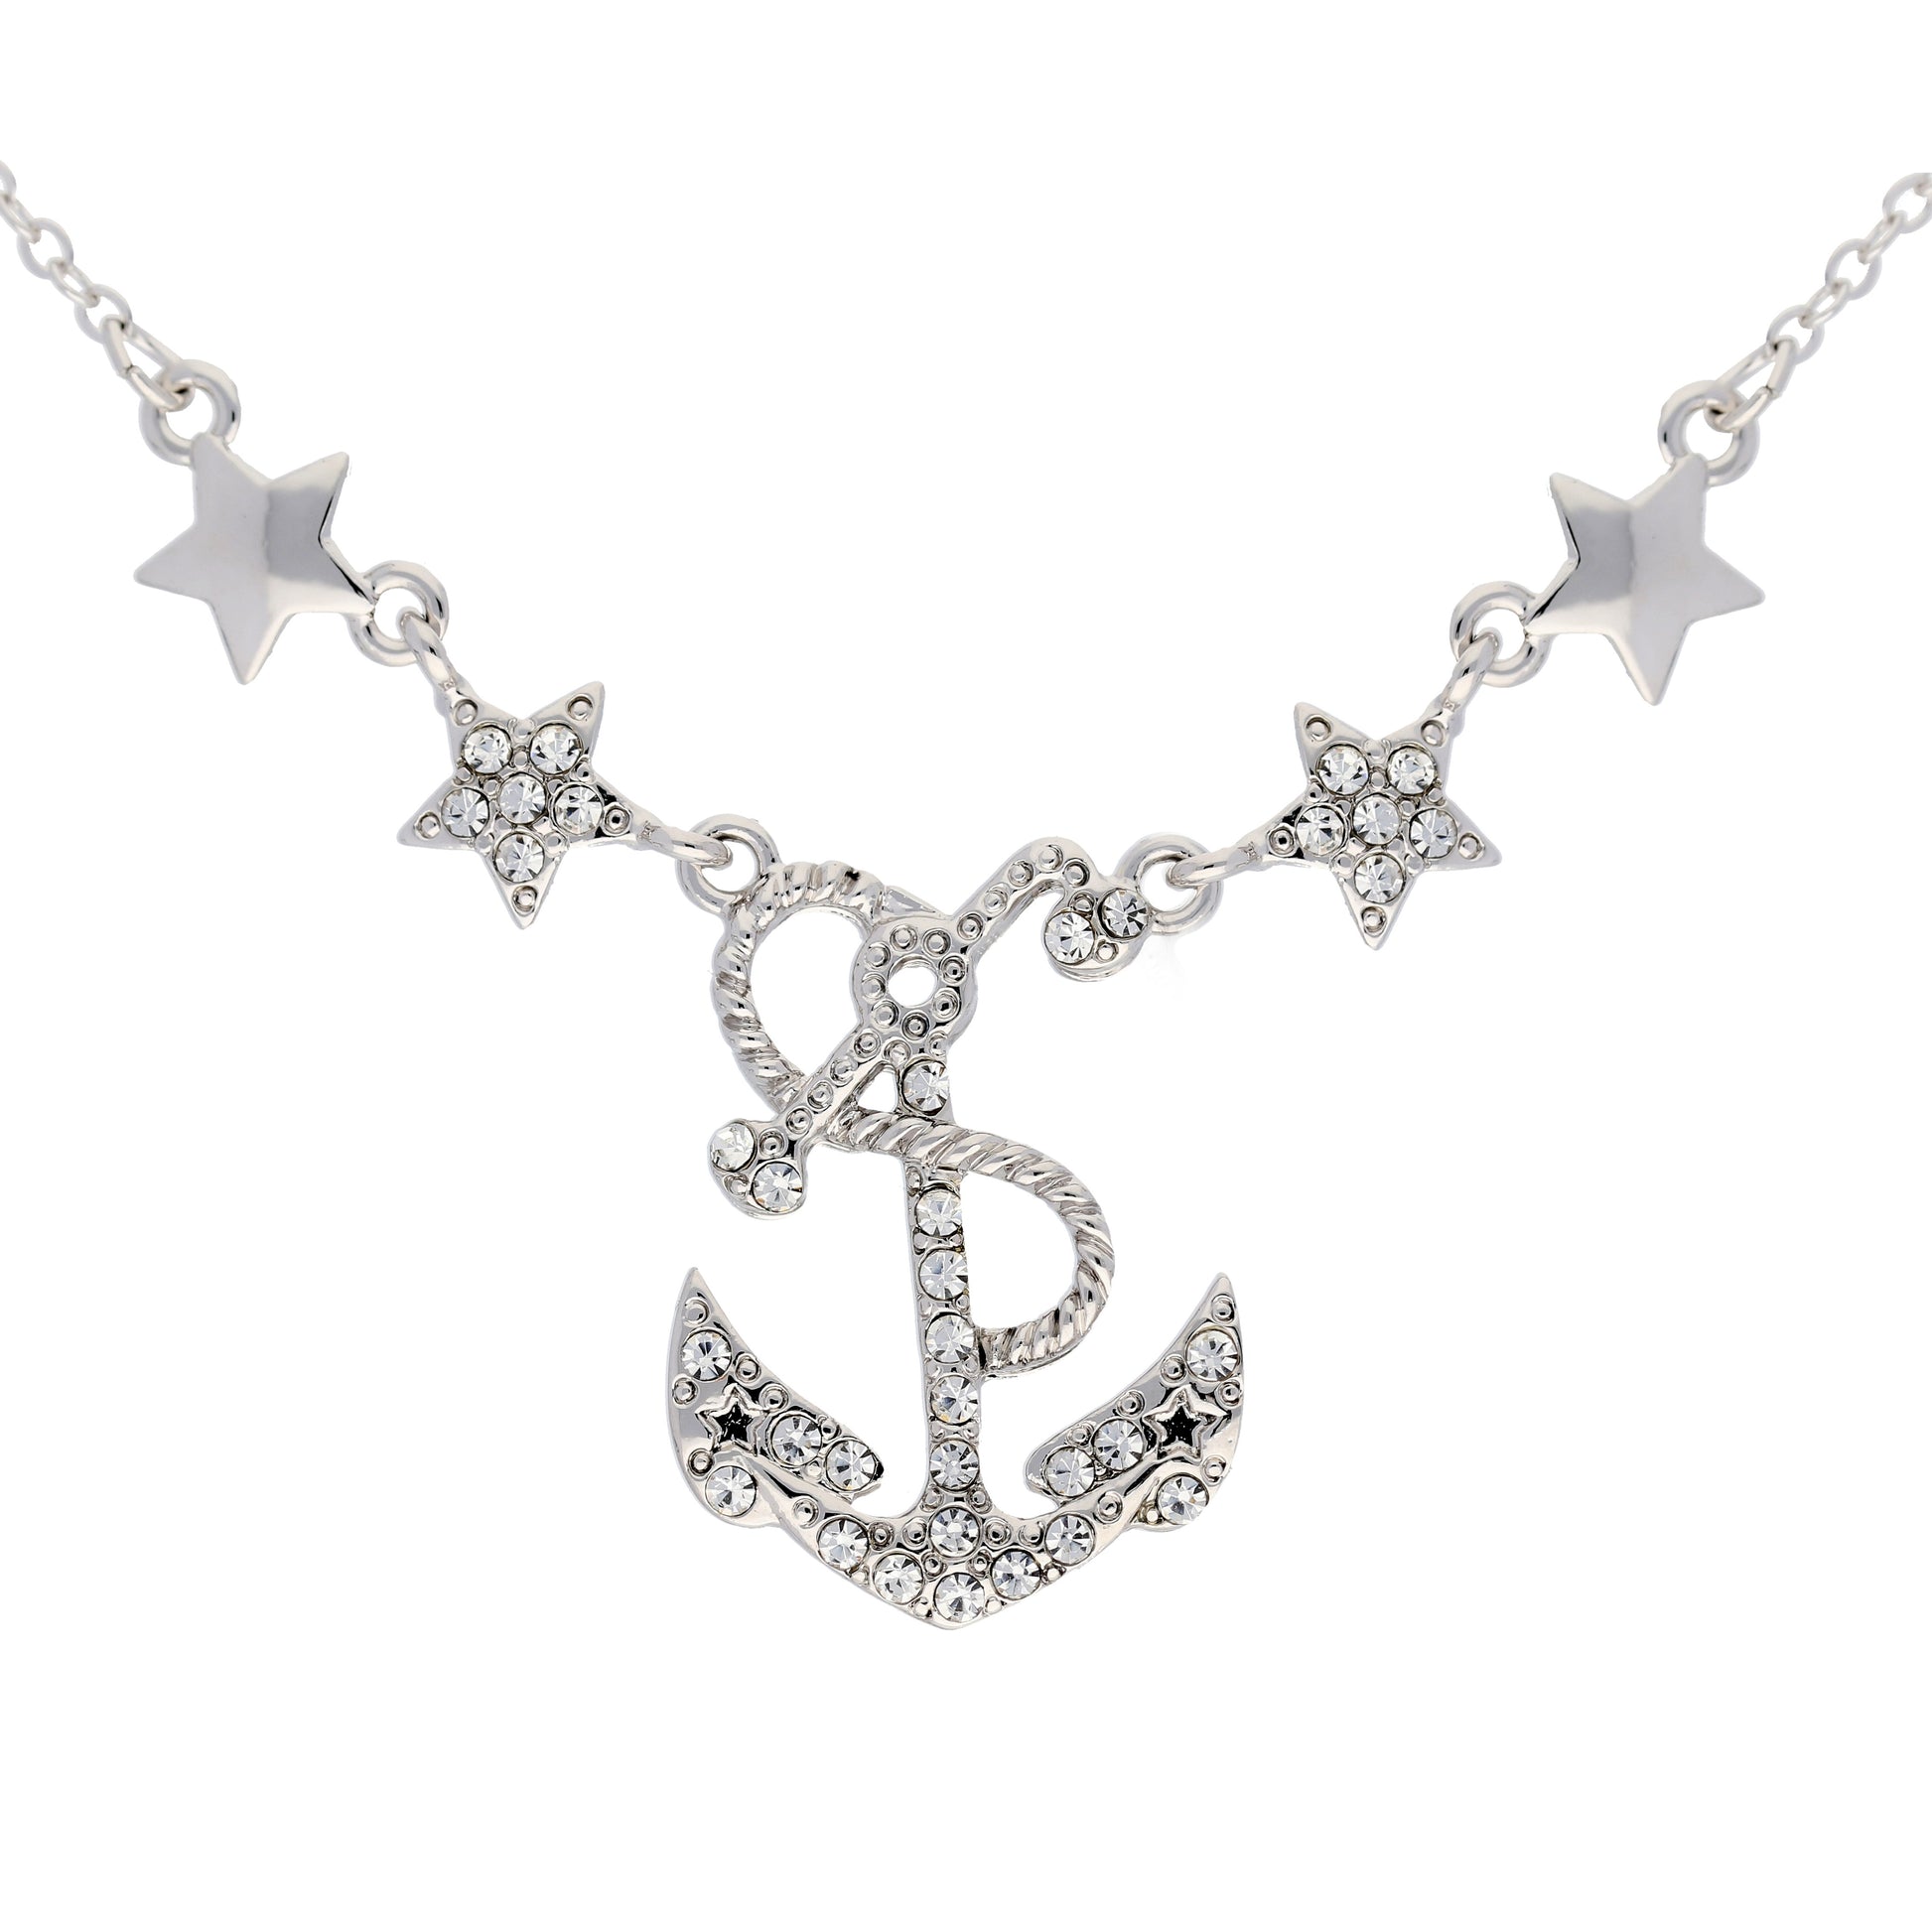 Sailing Under the Stars - Anchor Necklace Adjustable from 16" to 18" Necklace - Silver Insanity